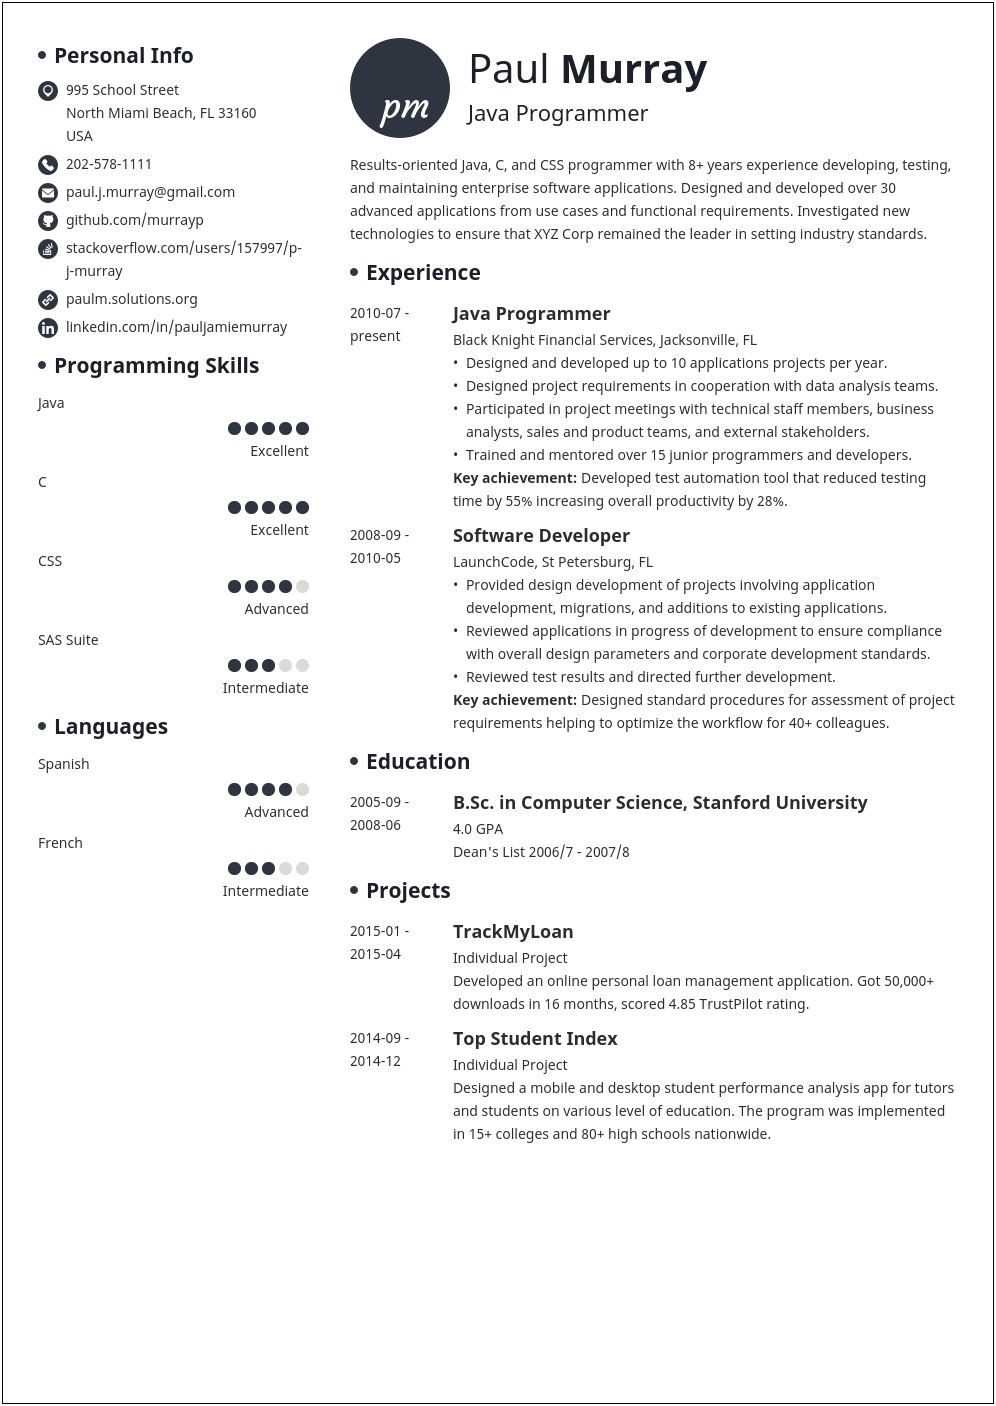 Does Self Taught Sound Good On A Resume